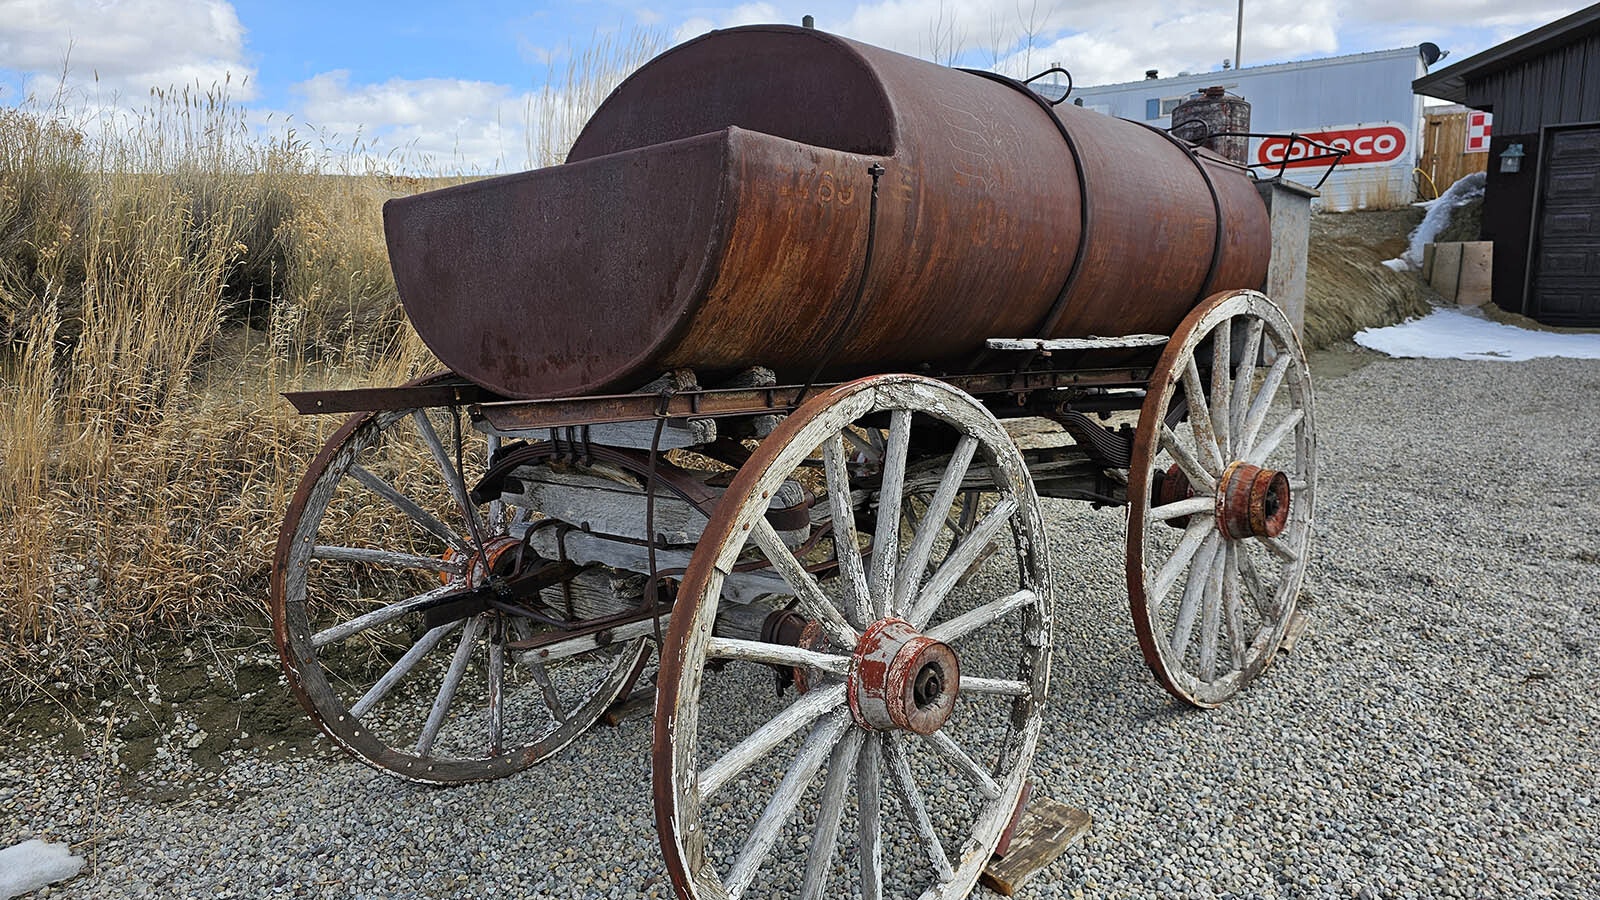 This is one of the earliest examples of a fuel wagon. It was pulled by horses.